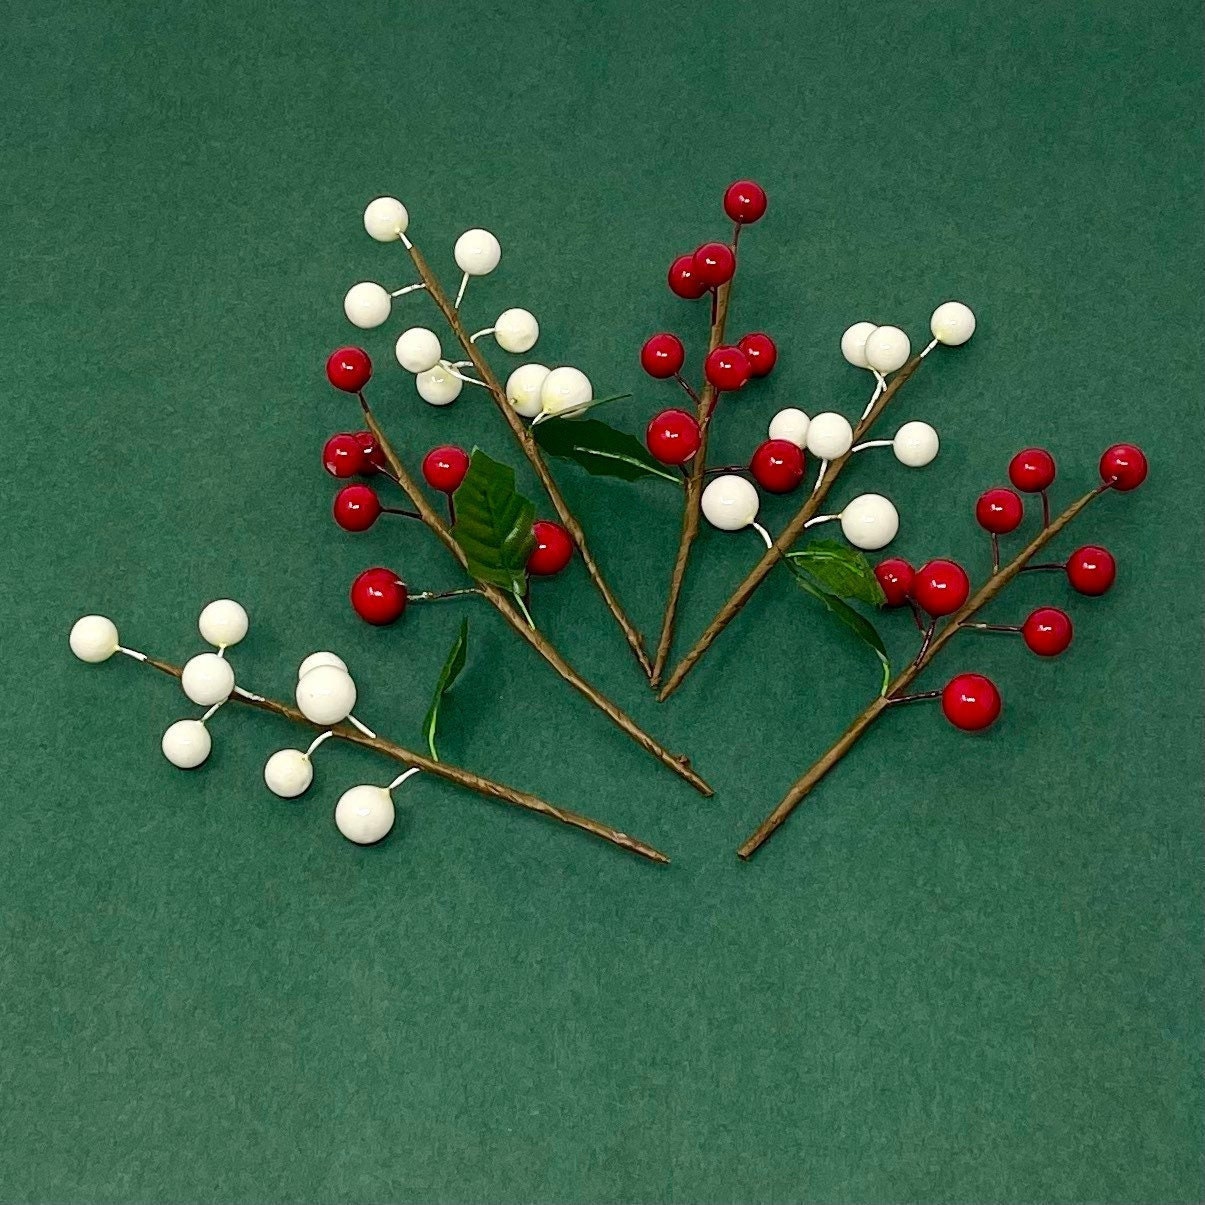 ArtiFlora White Berry Picks: Festive Stems For Christmas Arrangements,  Centerpieces, And Crafts From Liuliumayy, $11.76